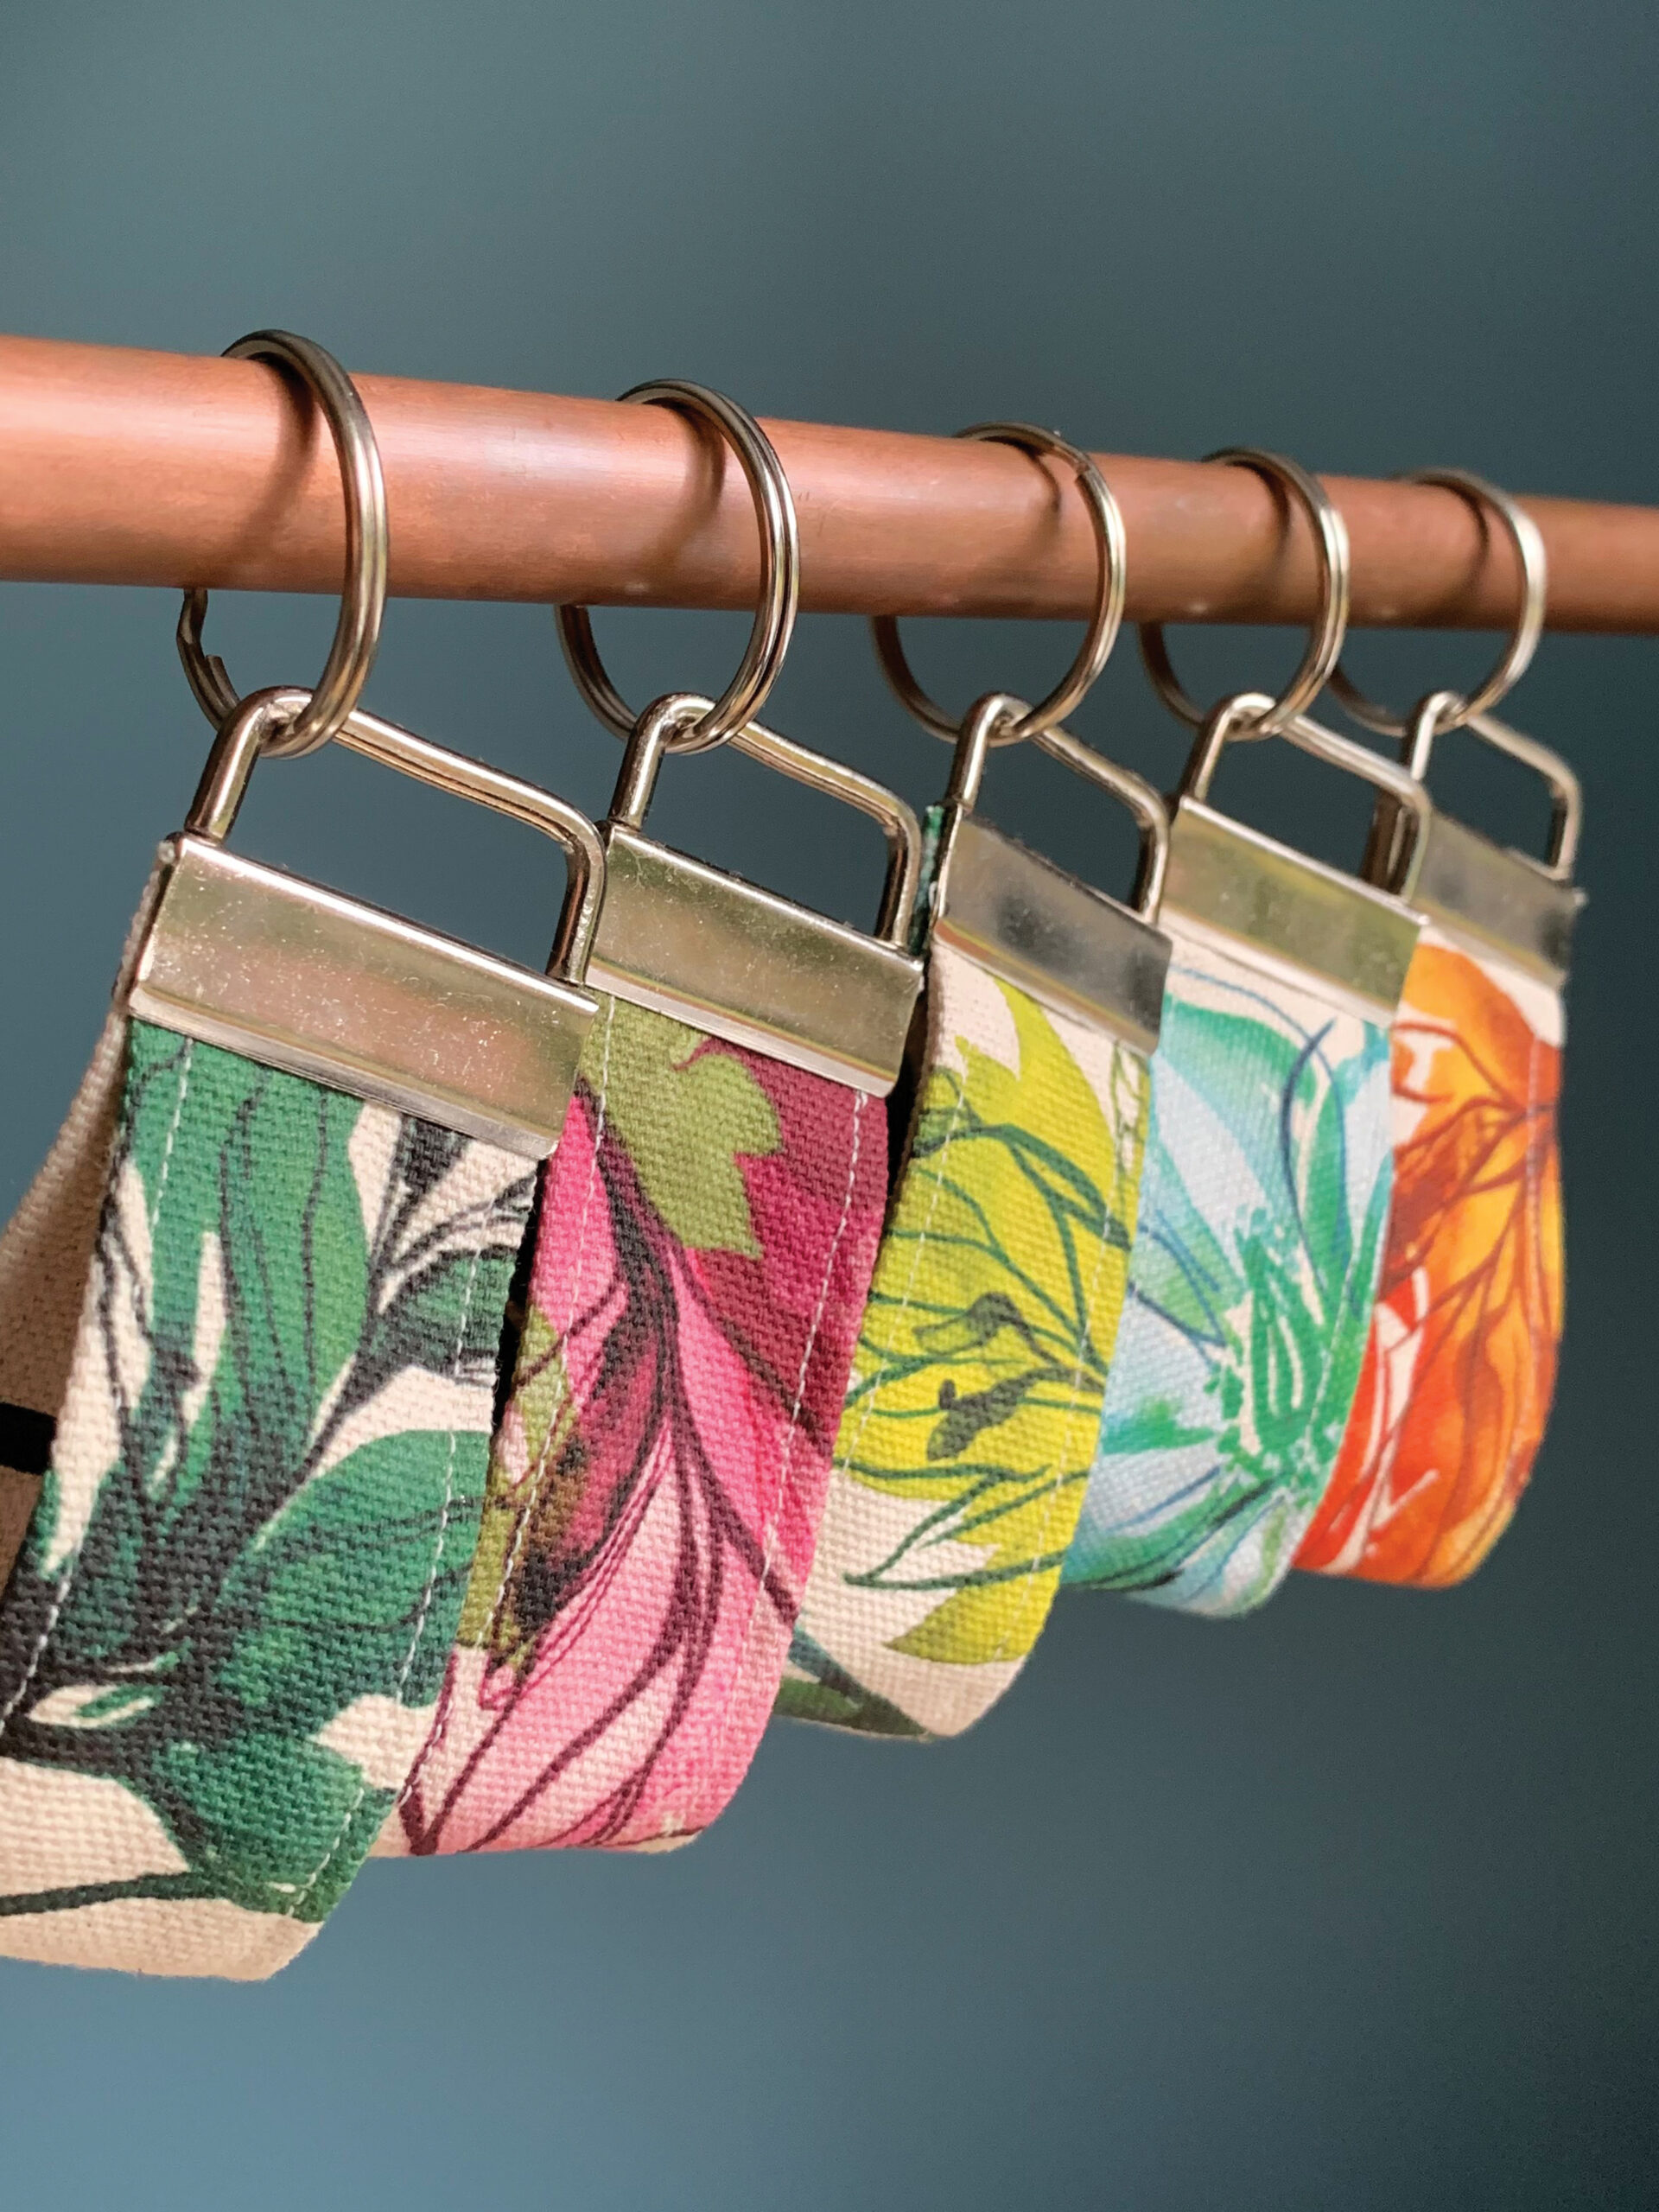 Five key rings made from fabric offcuts